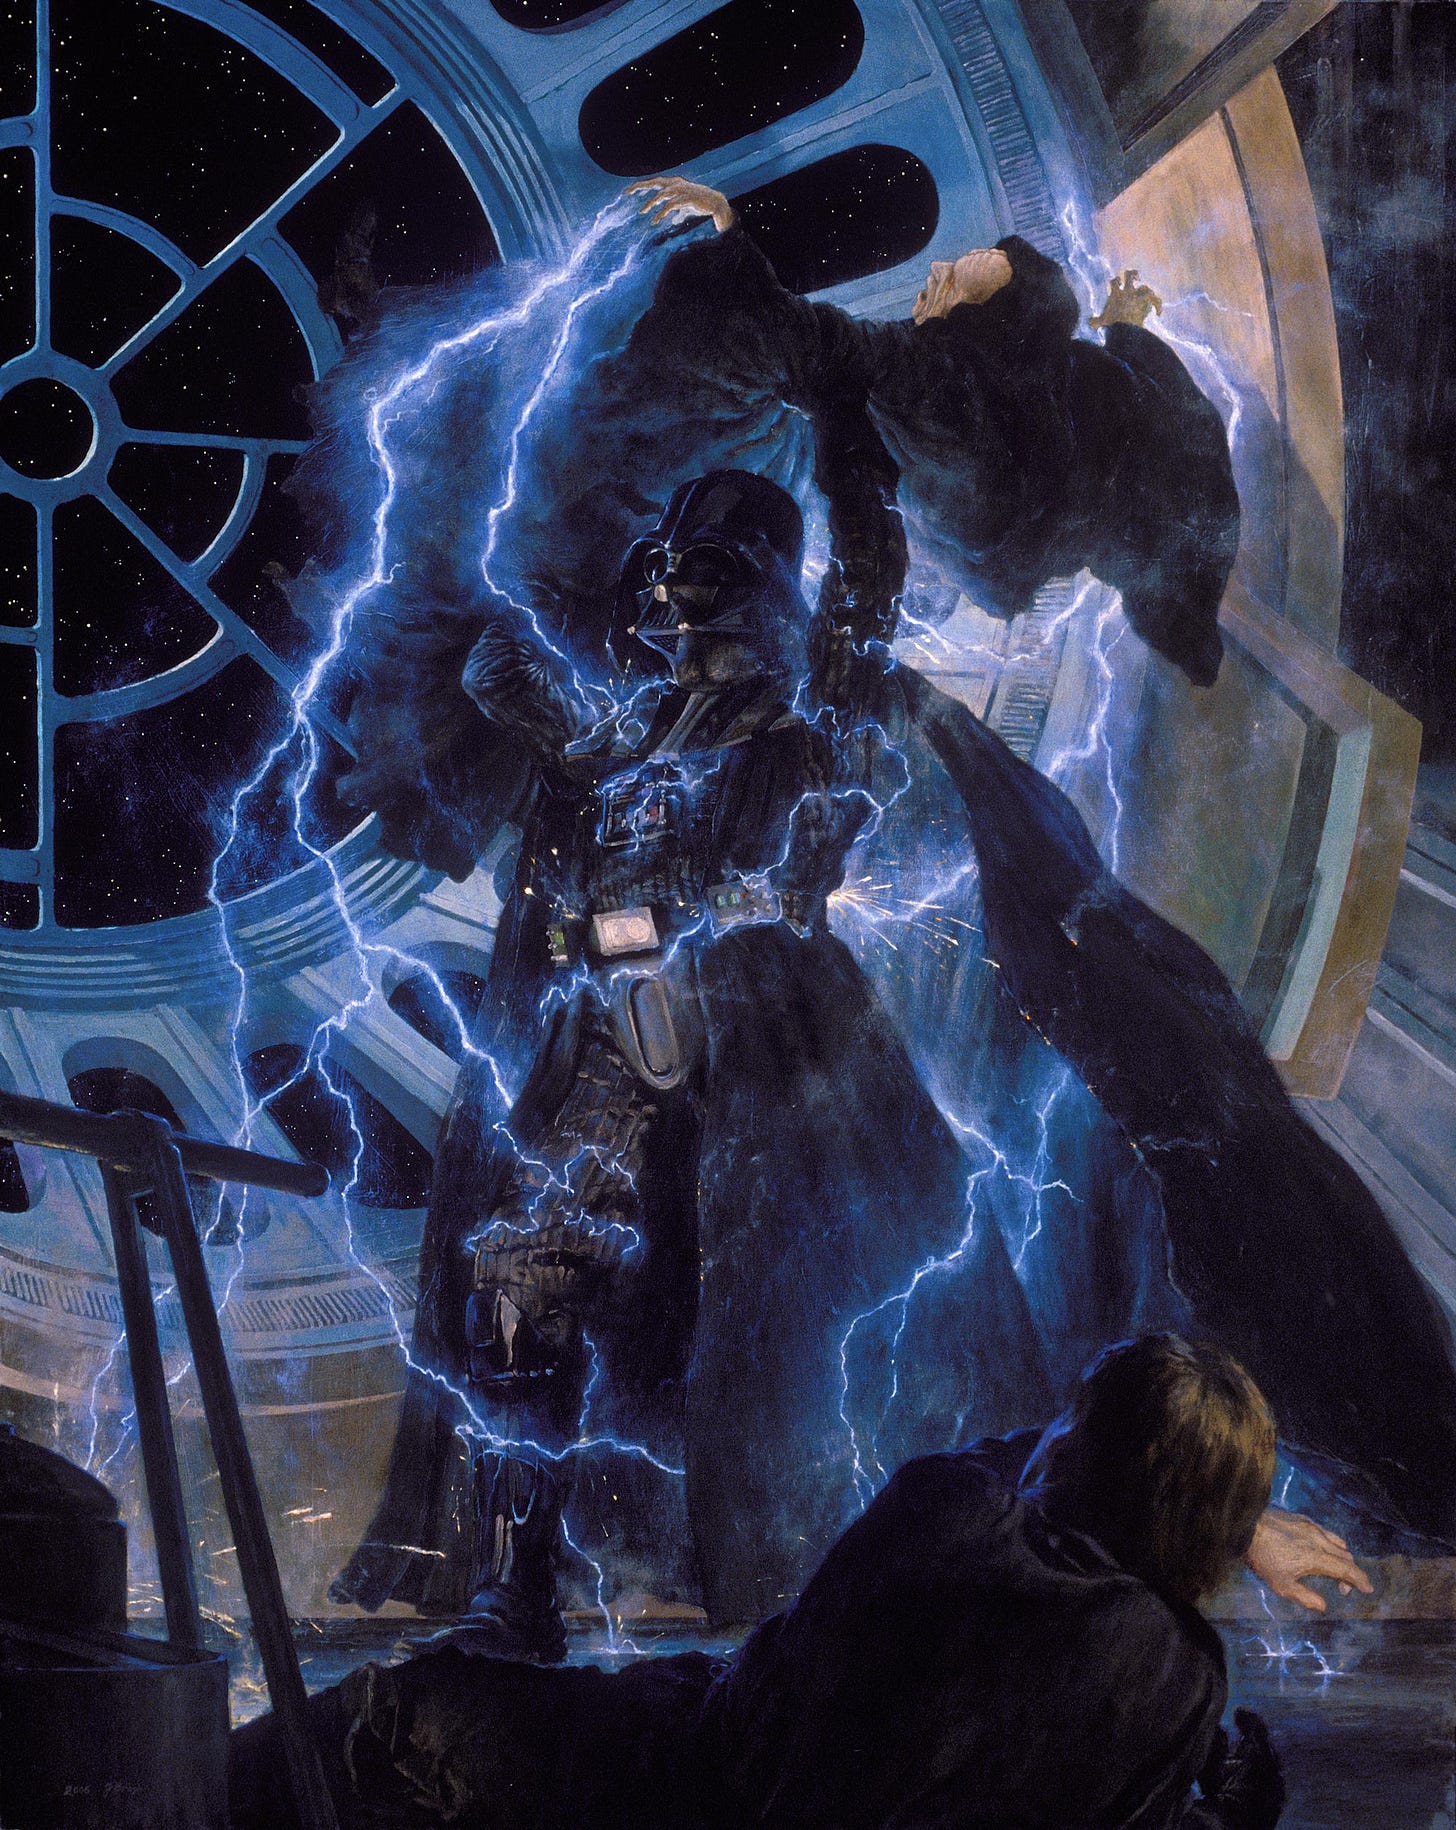 A circular window with a spiderweb like design shows the stars, serving as a background for the black clad armored figure of Darth Vader. He holds the ancient Emperor aloft, even as blue electricity leaps from his fingers and causes sparks across his mechanical body. The Jedi Knight Luke Skywalker lies near a railing with his back to the viewer, looking up at his father's heroic sacrifice.